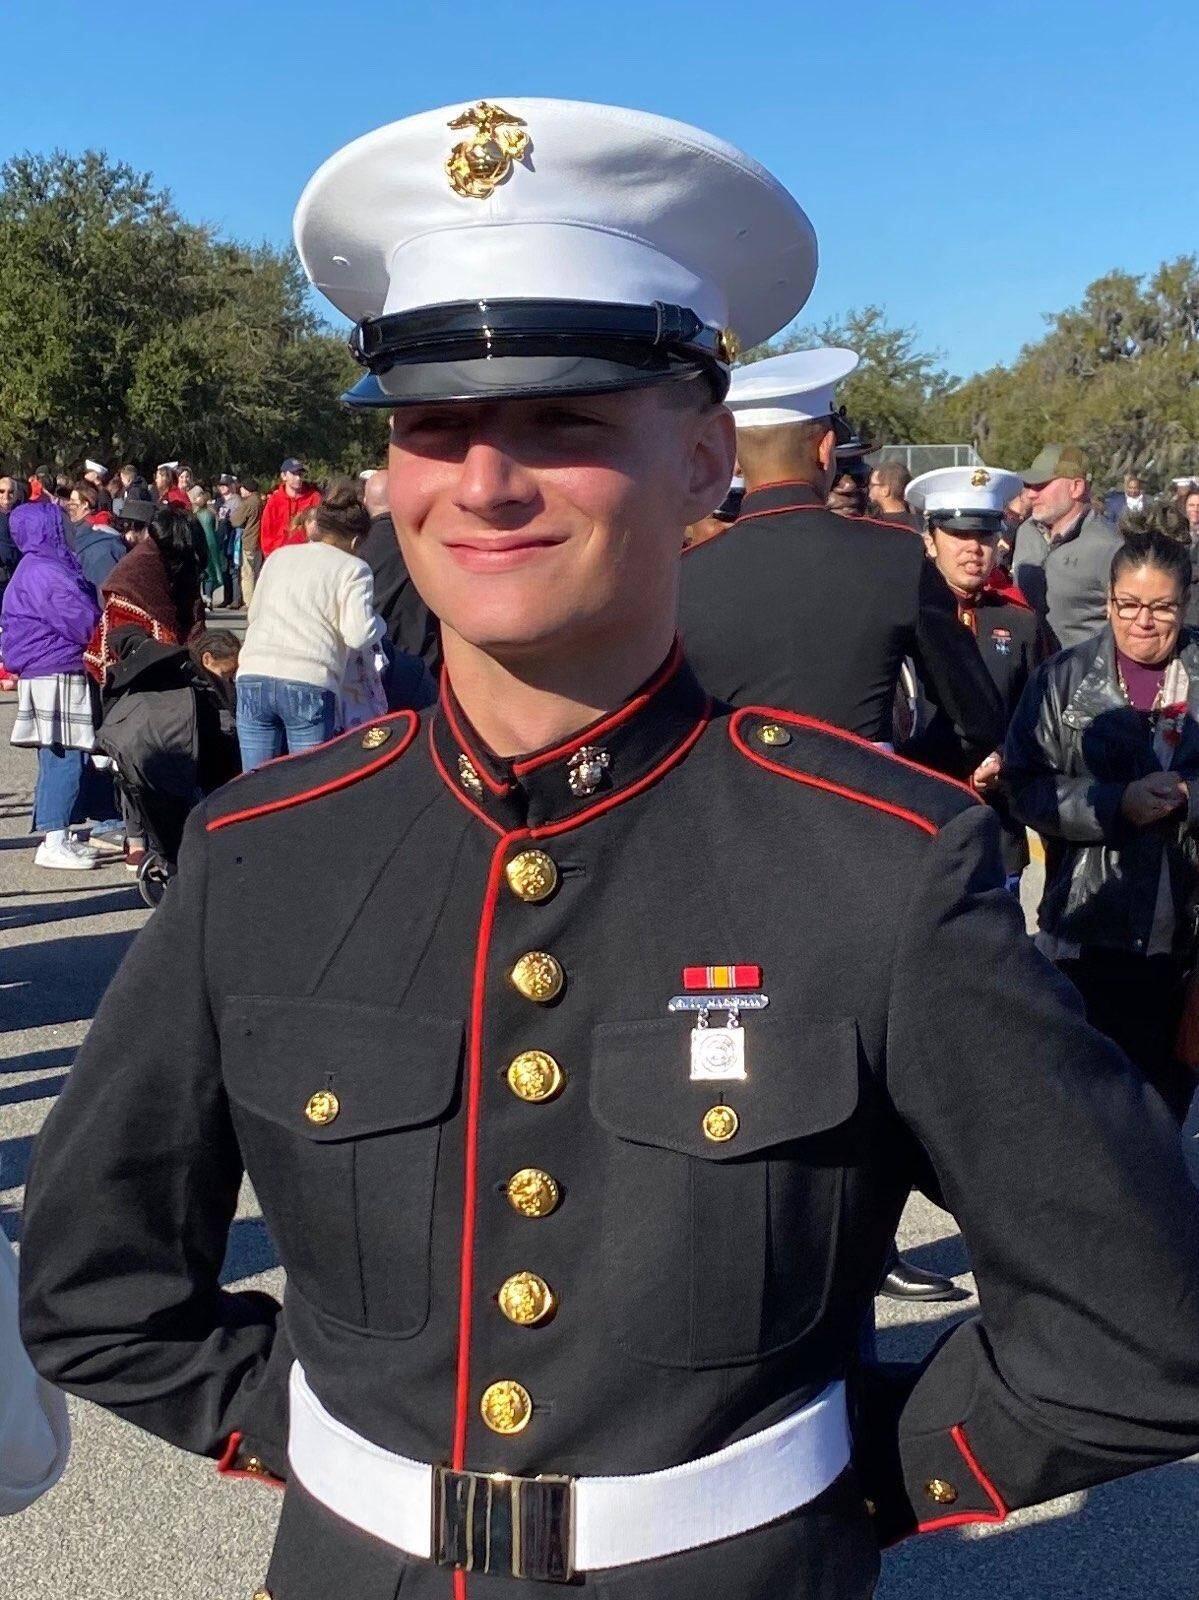 James Regnier, Class of 2019, United States Marine Corps